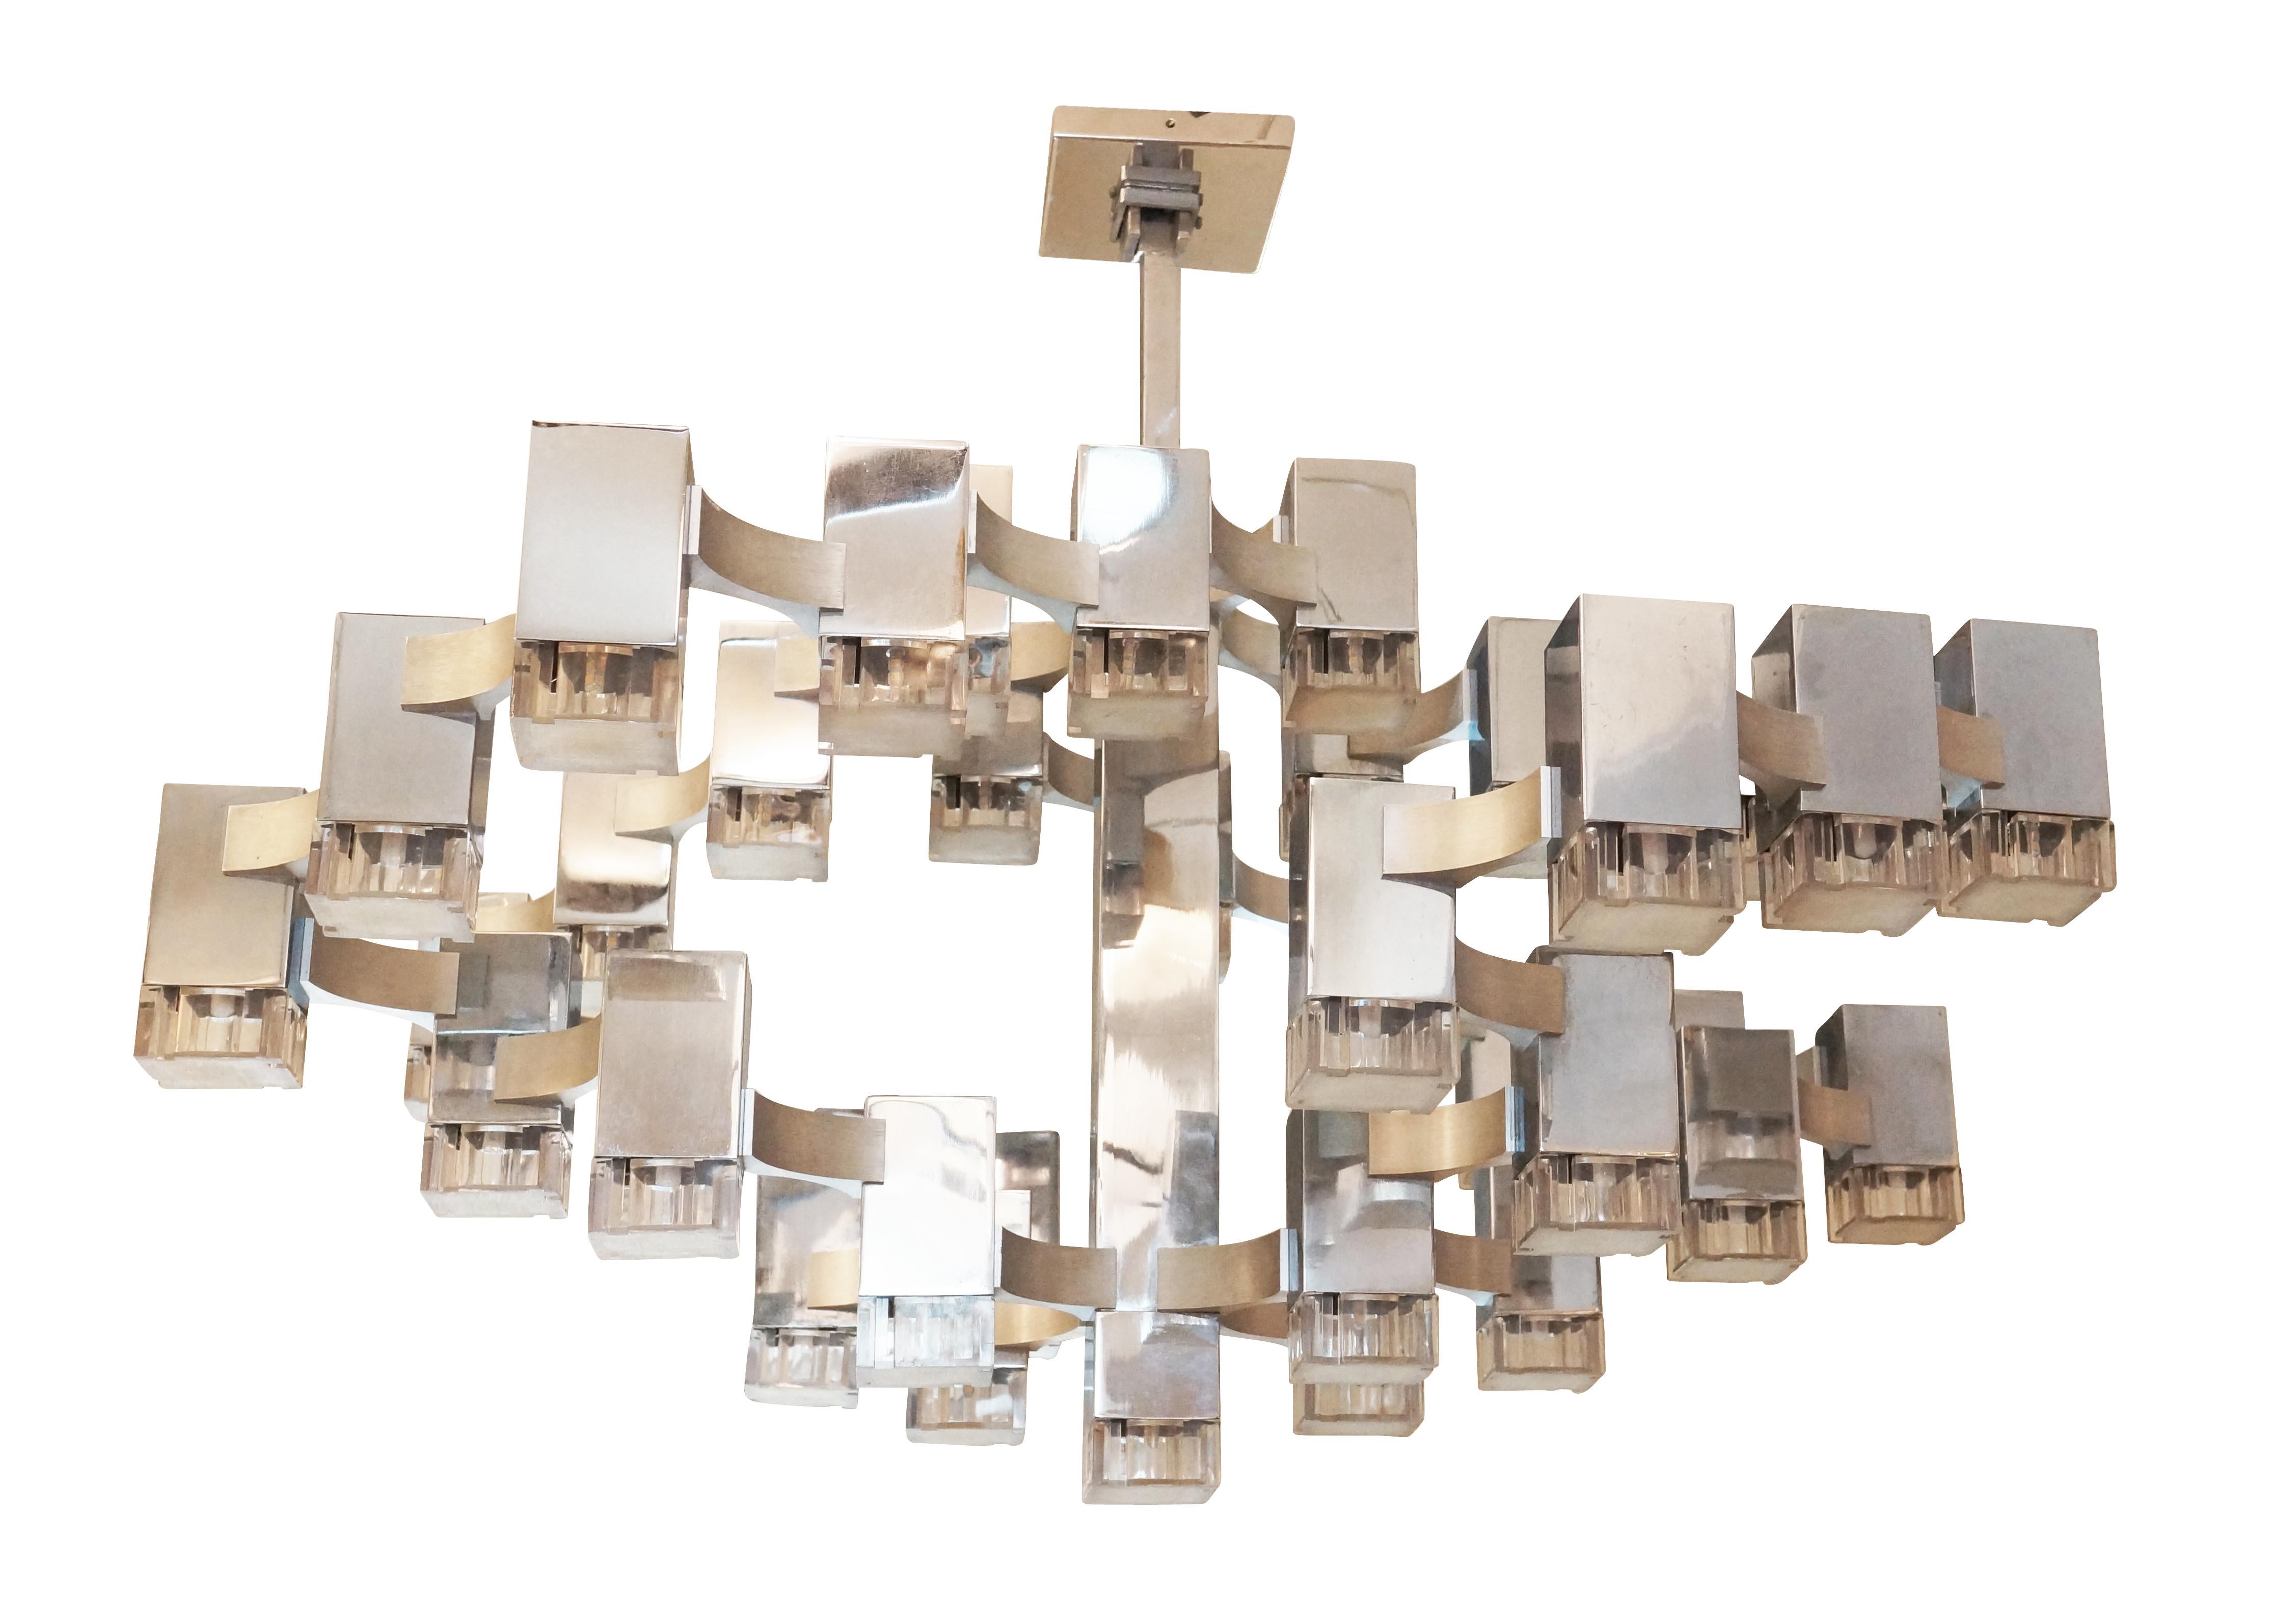 Impressive “cubist” chandelier designed by Sciolari in the 1970s. Features 37 lights on a polished nickel frame with satin nickel accents. Diffusers are acrylic.

Condition: Good vintage condition, minor wear consistent with age and use.

Width: